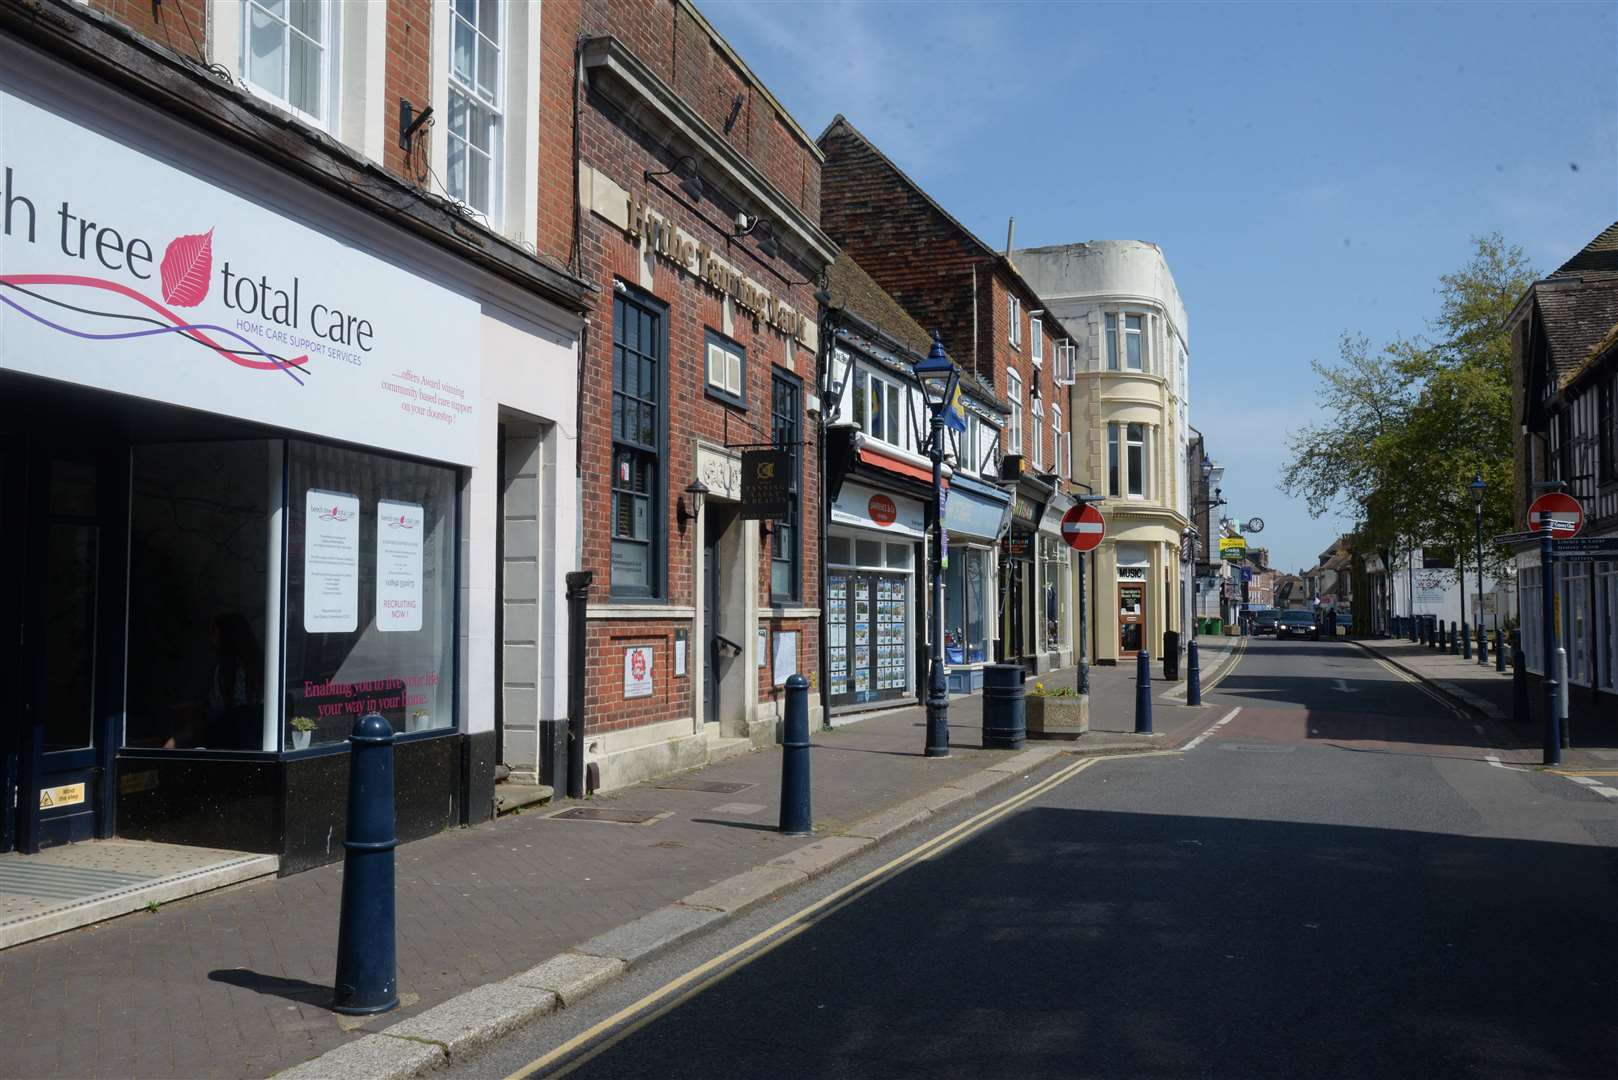 In Hythe there is a proposal to extend the temporary pedestrianisation of part of the High Street and Bank Street